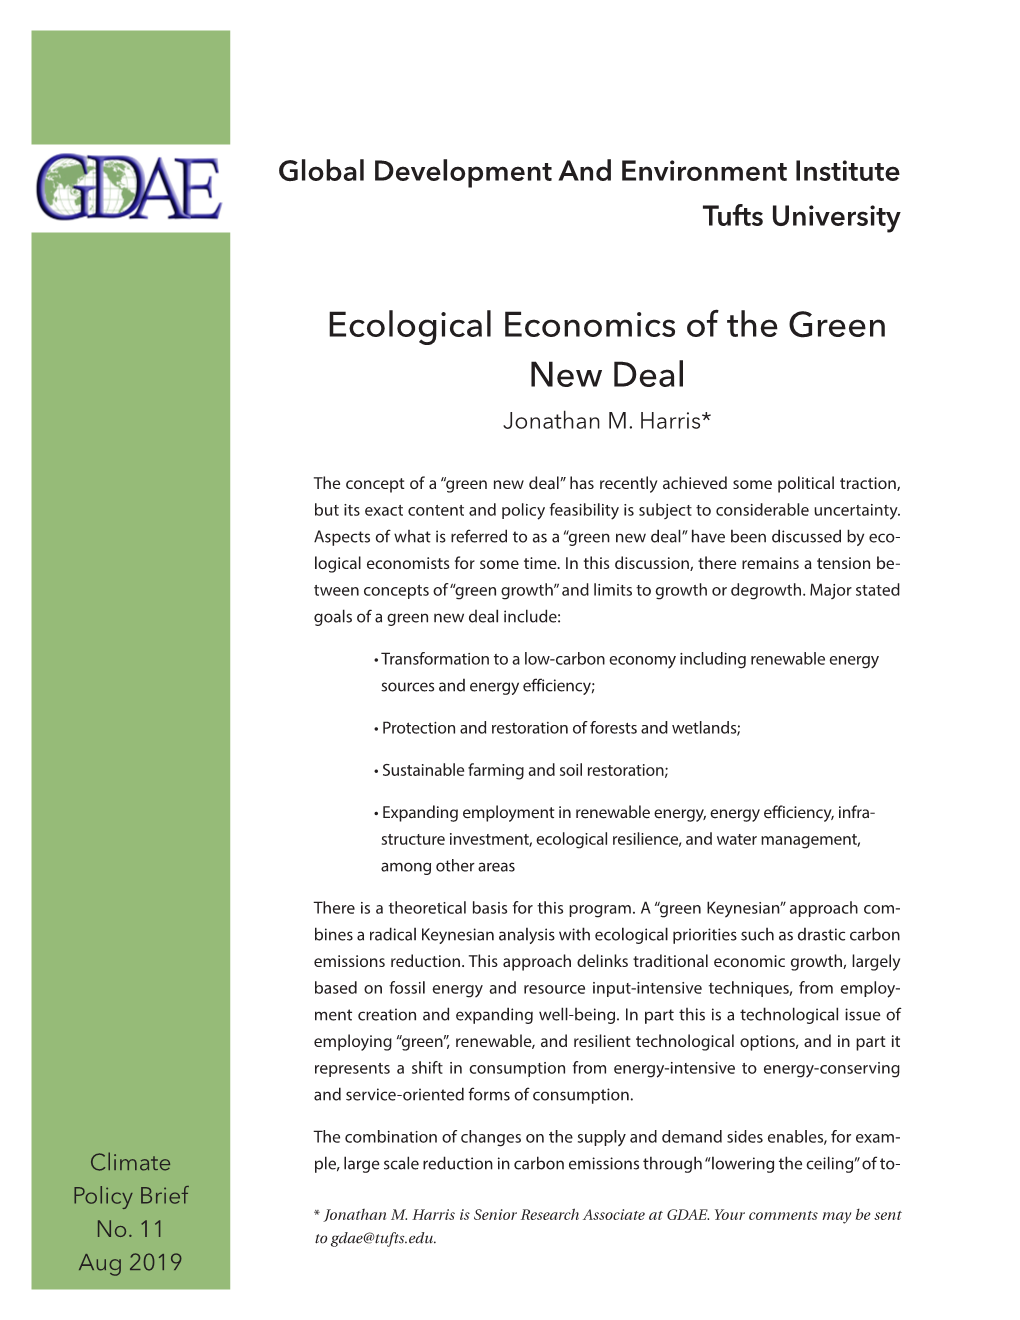 Ecological Economics of the Green New Deal Jonathan M